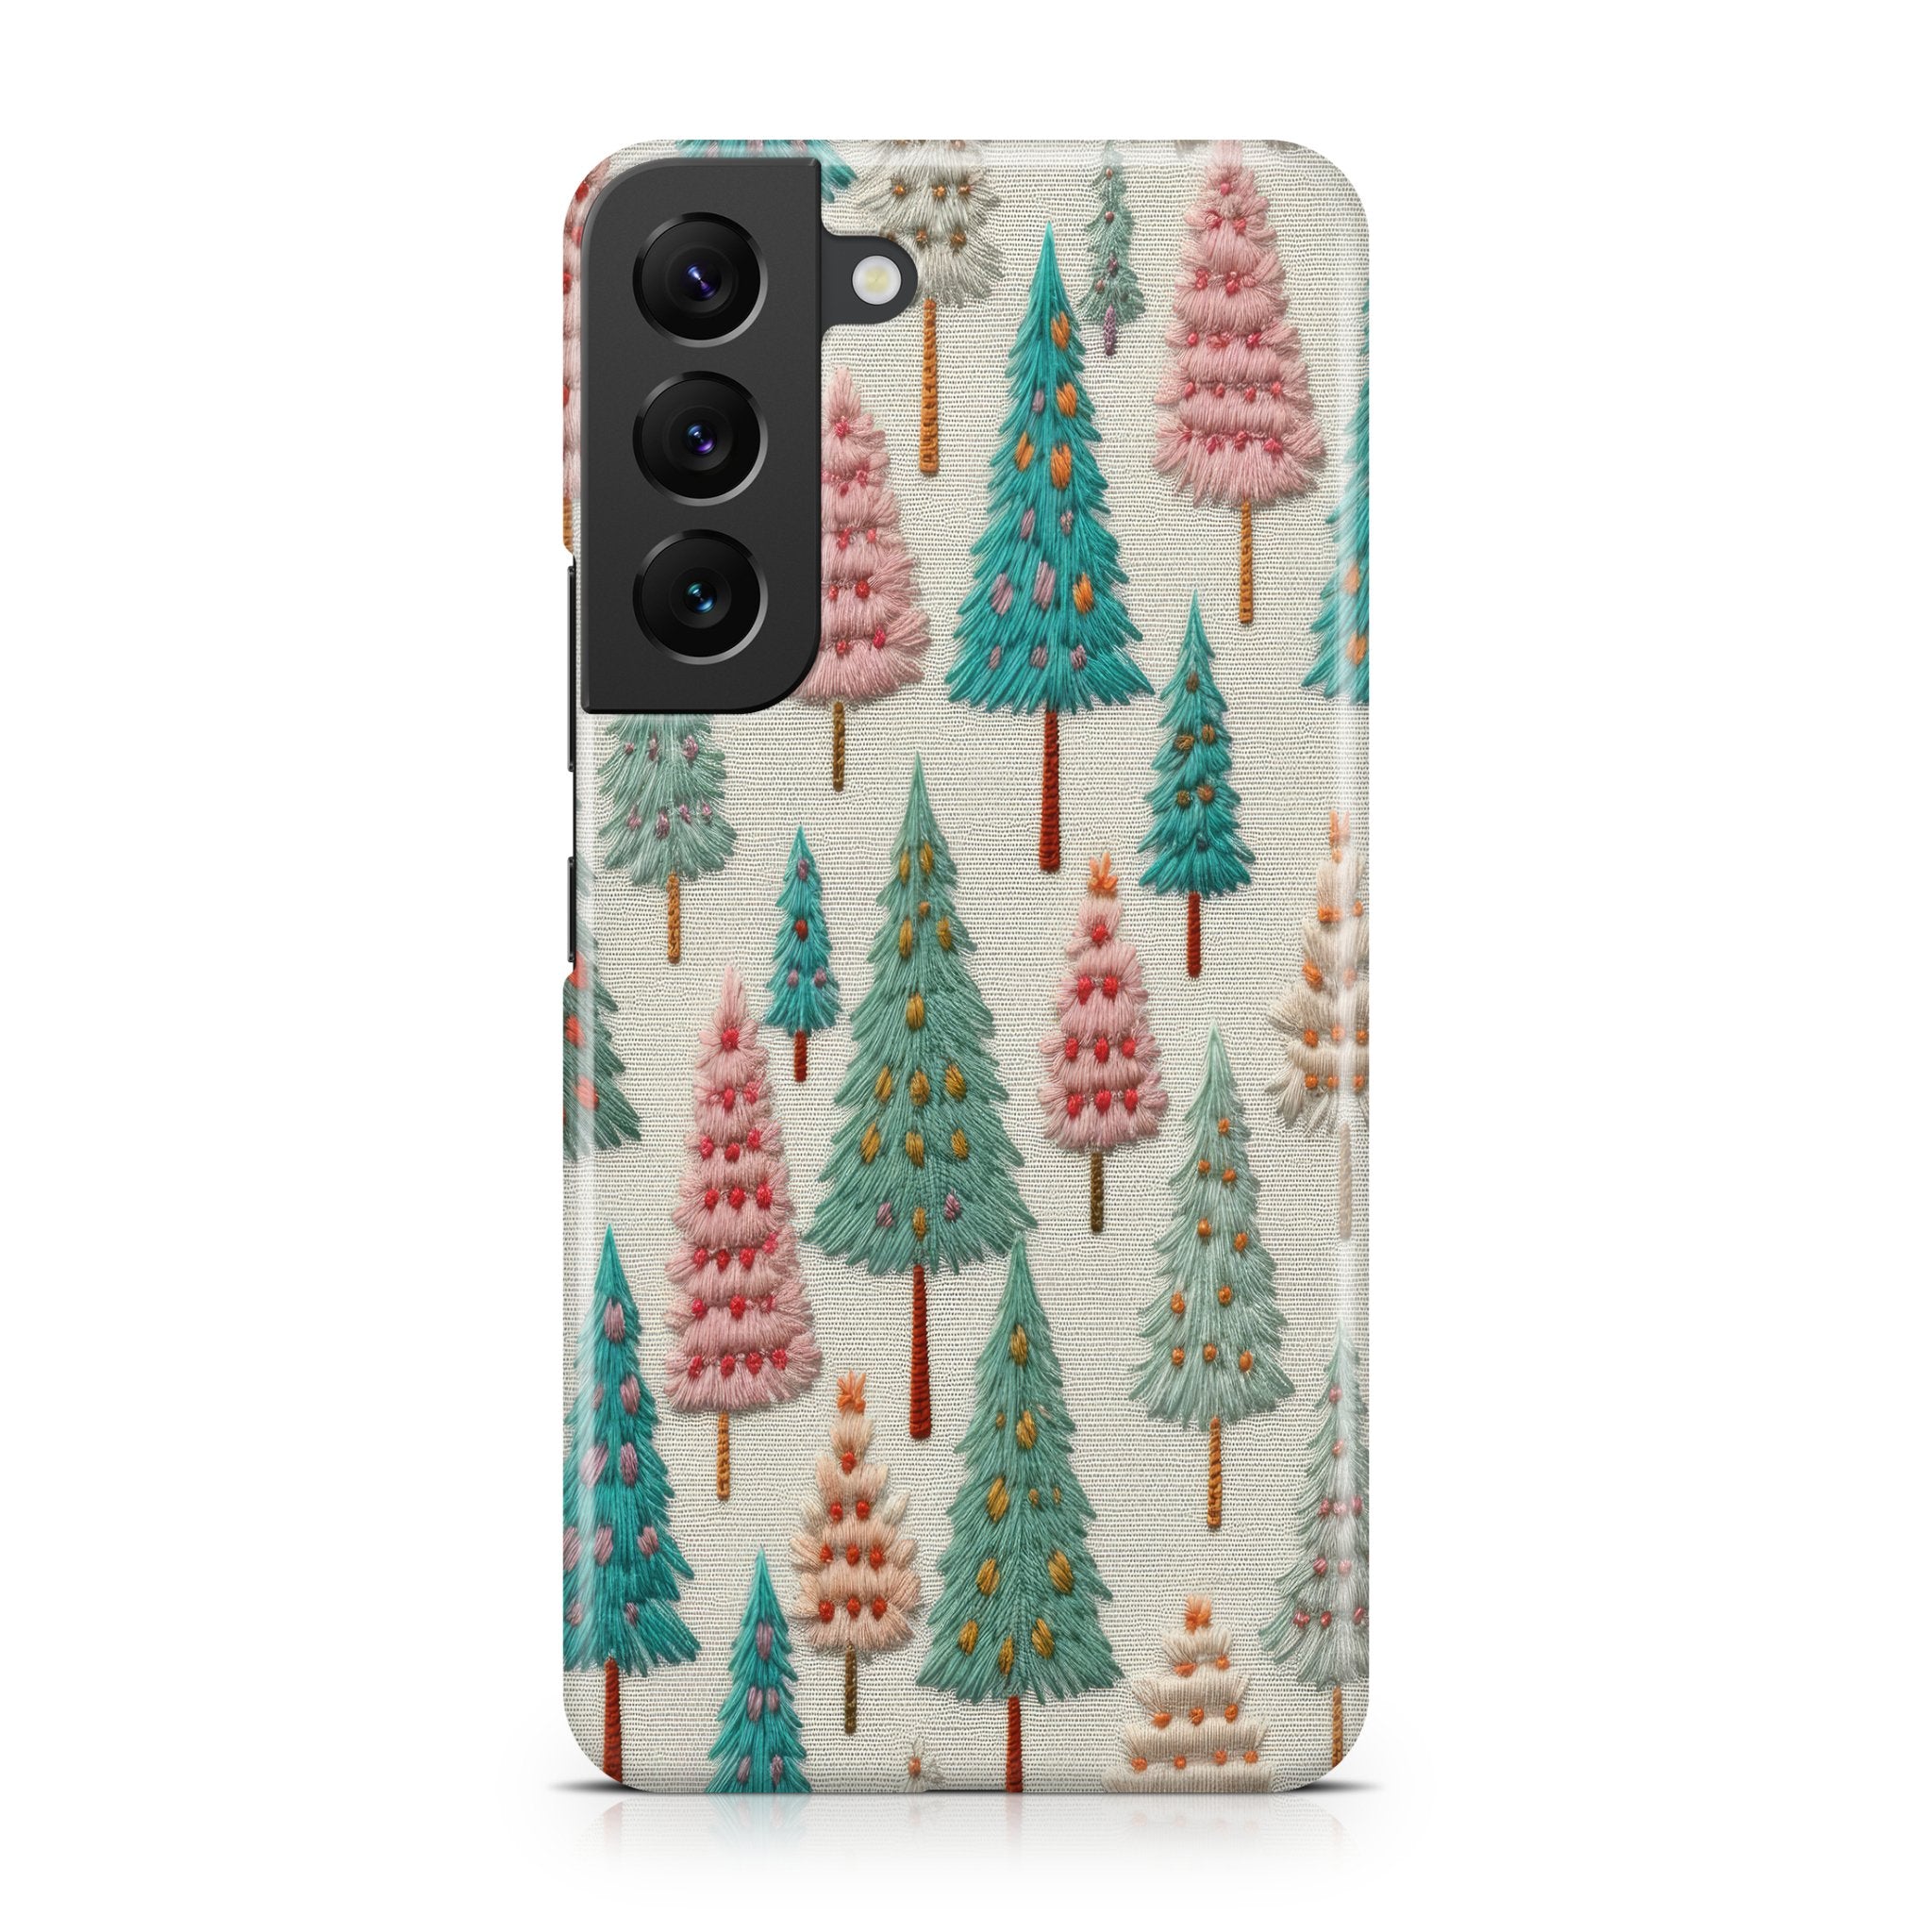 Christmas Trees - Samsung phone case designs by CaseSwagger